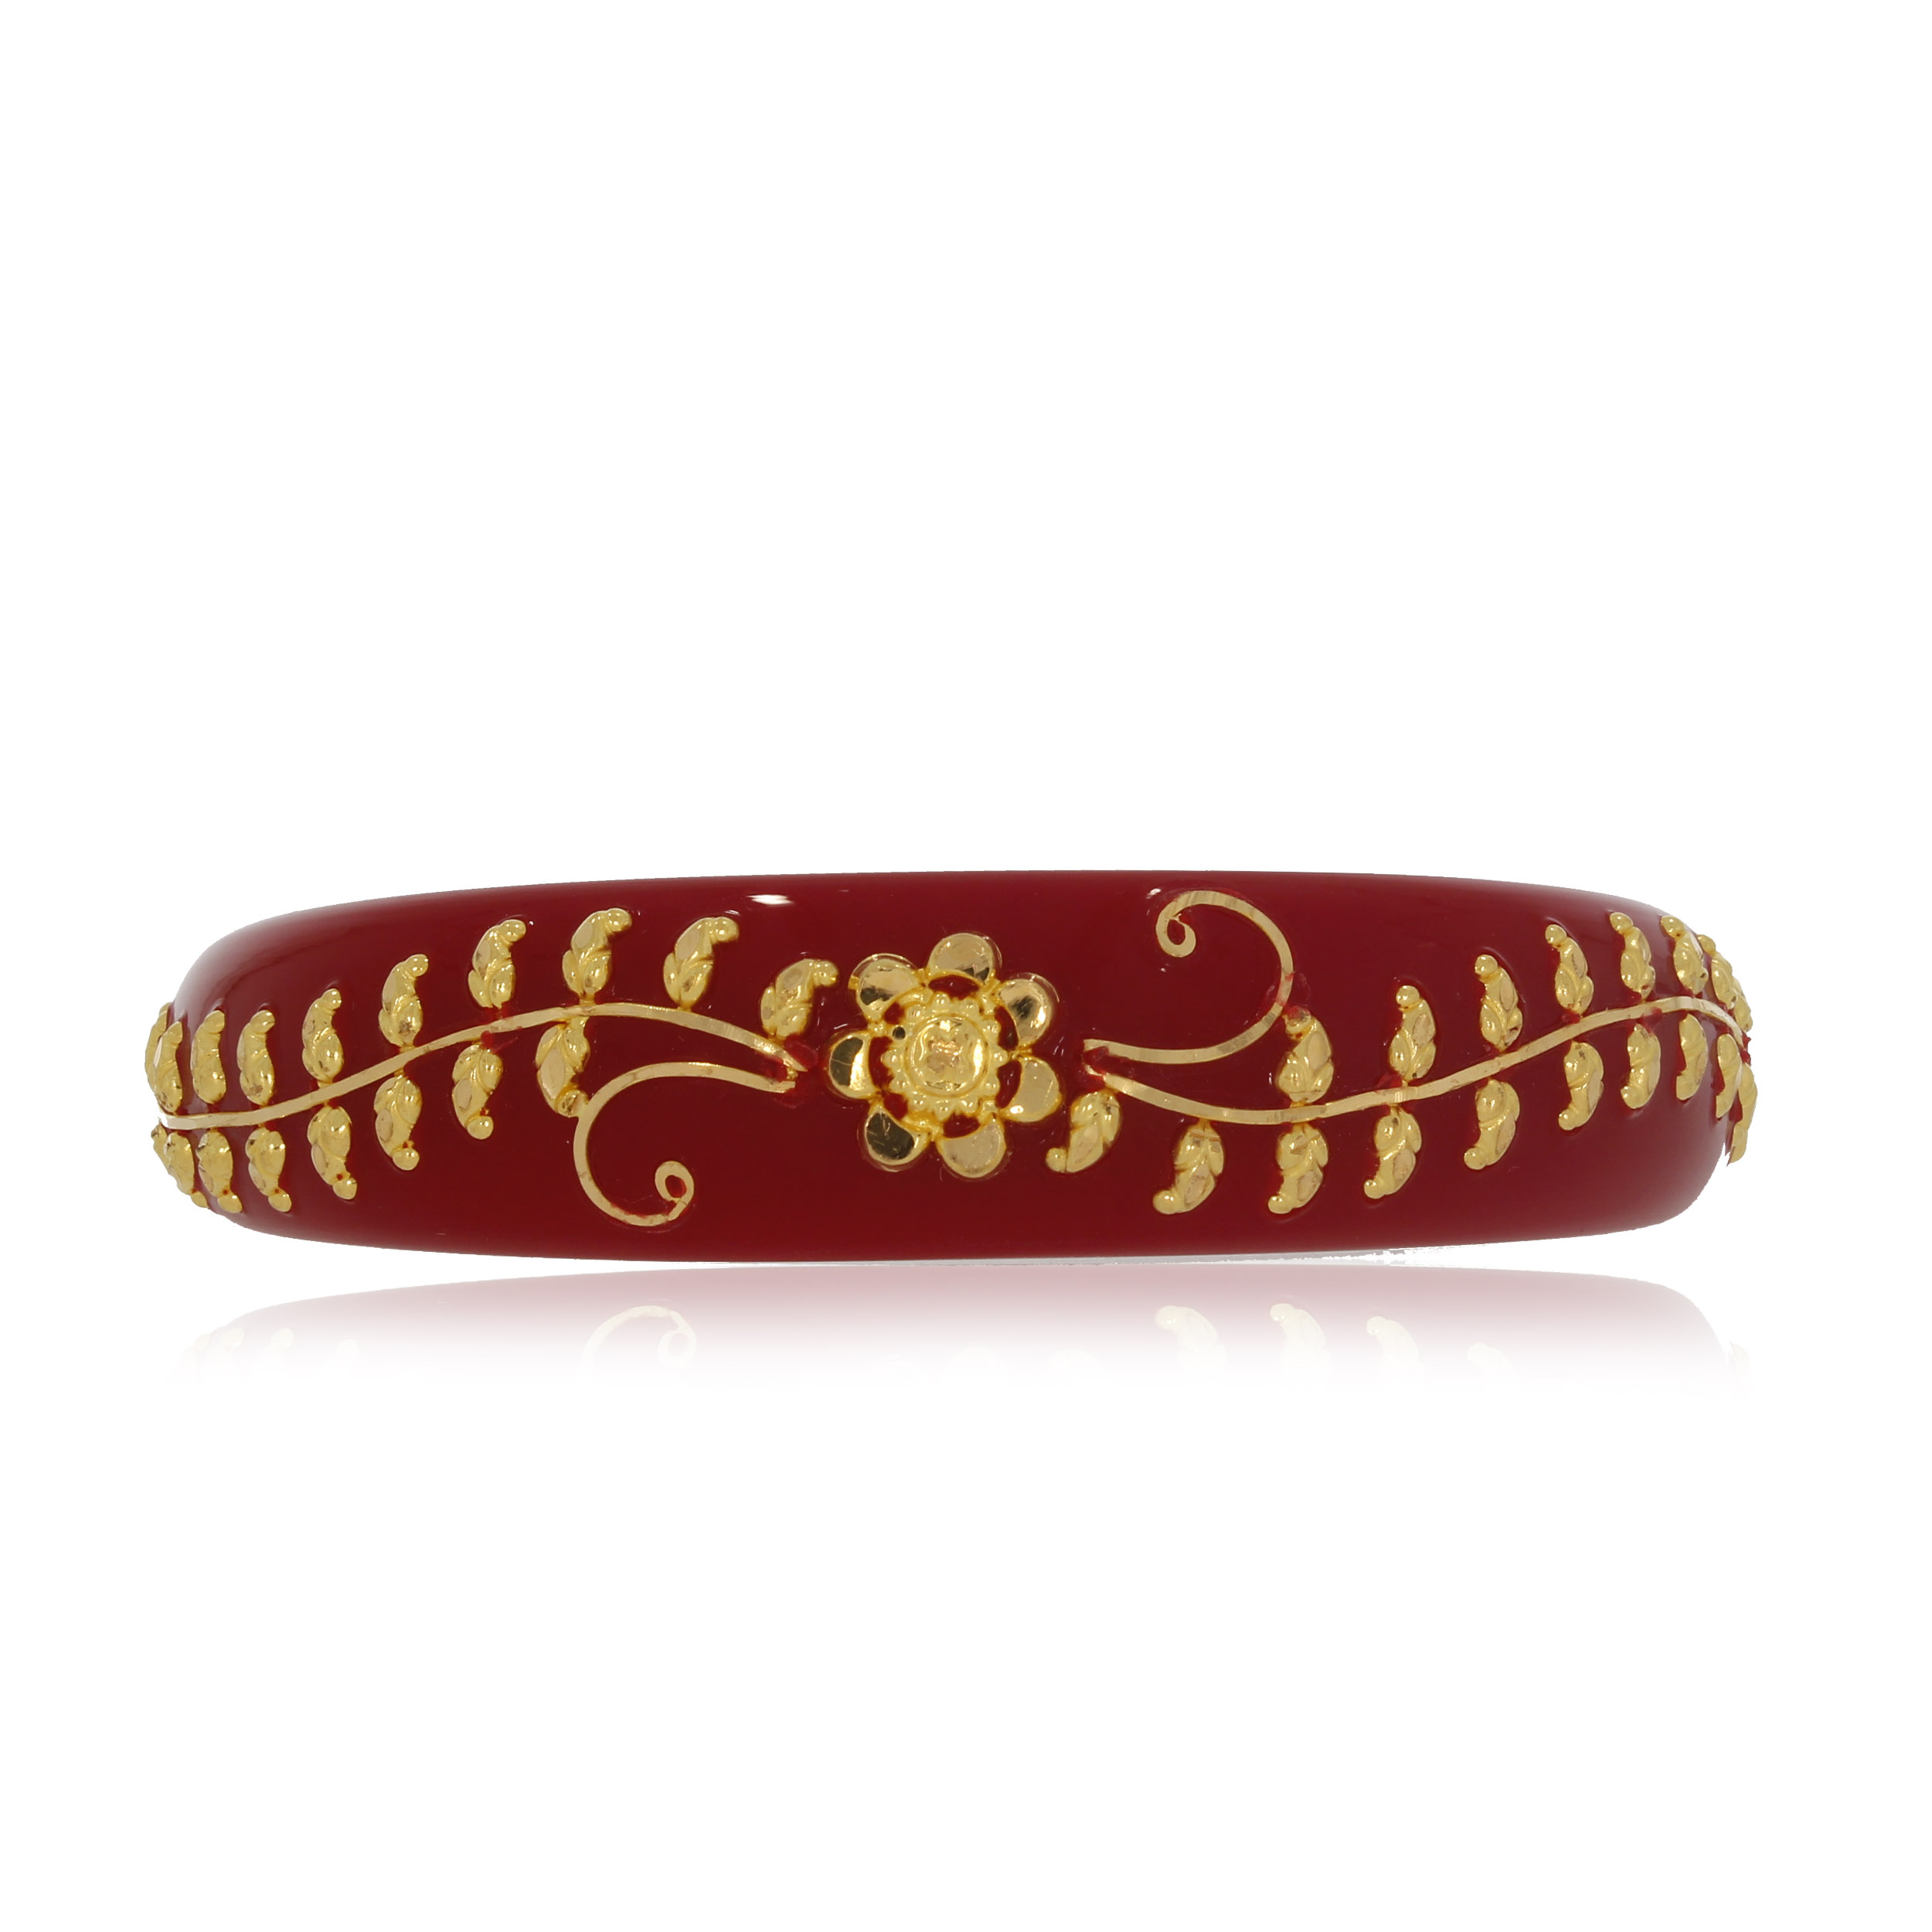 RED SOPY KDM GOLD BRACELET POLA BADHANO 1 PIECE APPROX WGT: 0.500 GM FOR  WOMEN.